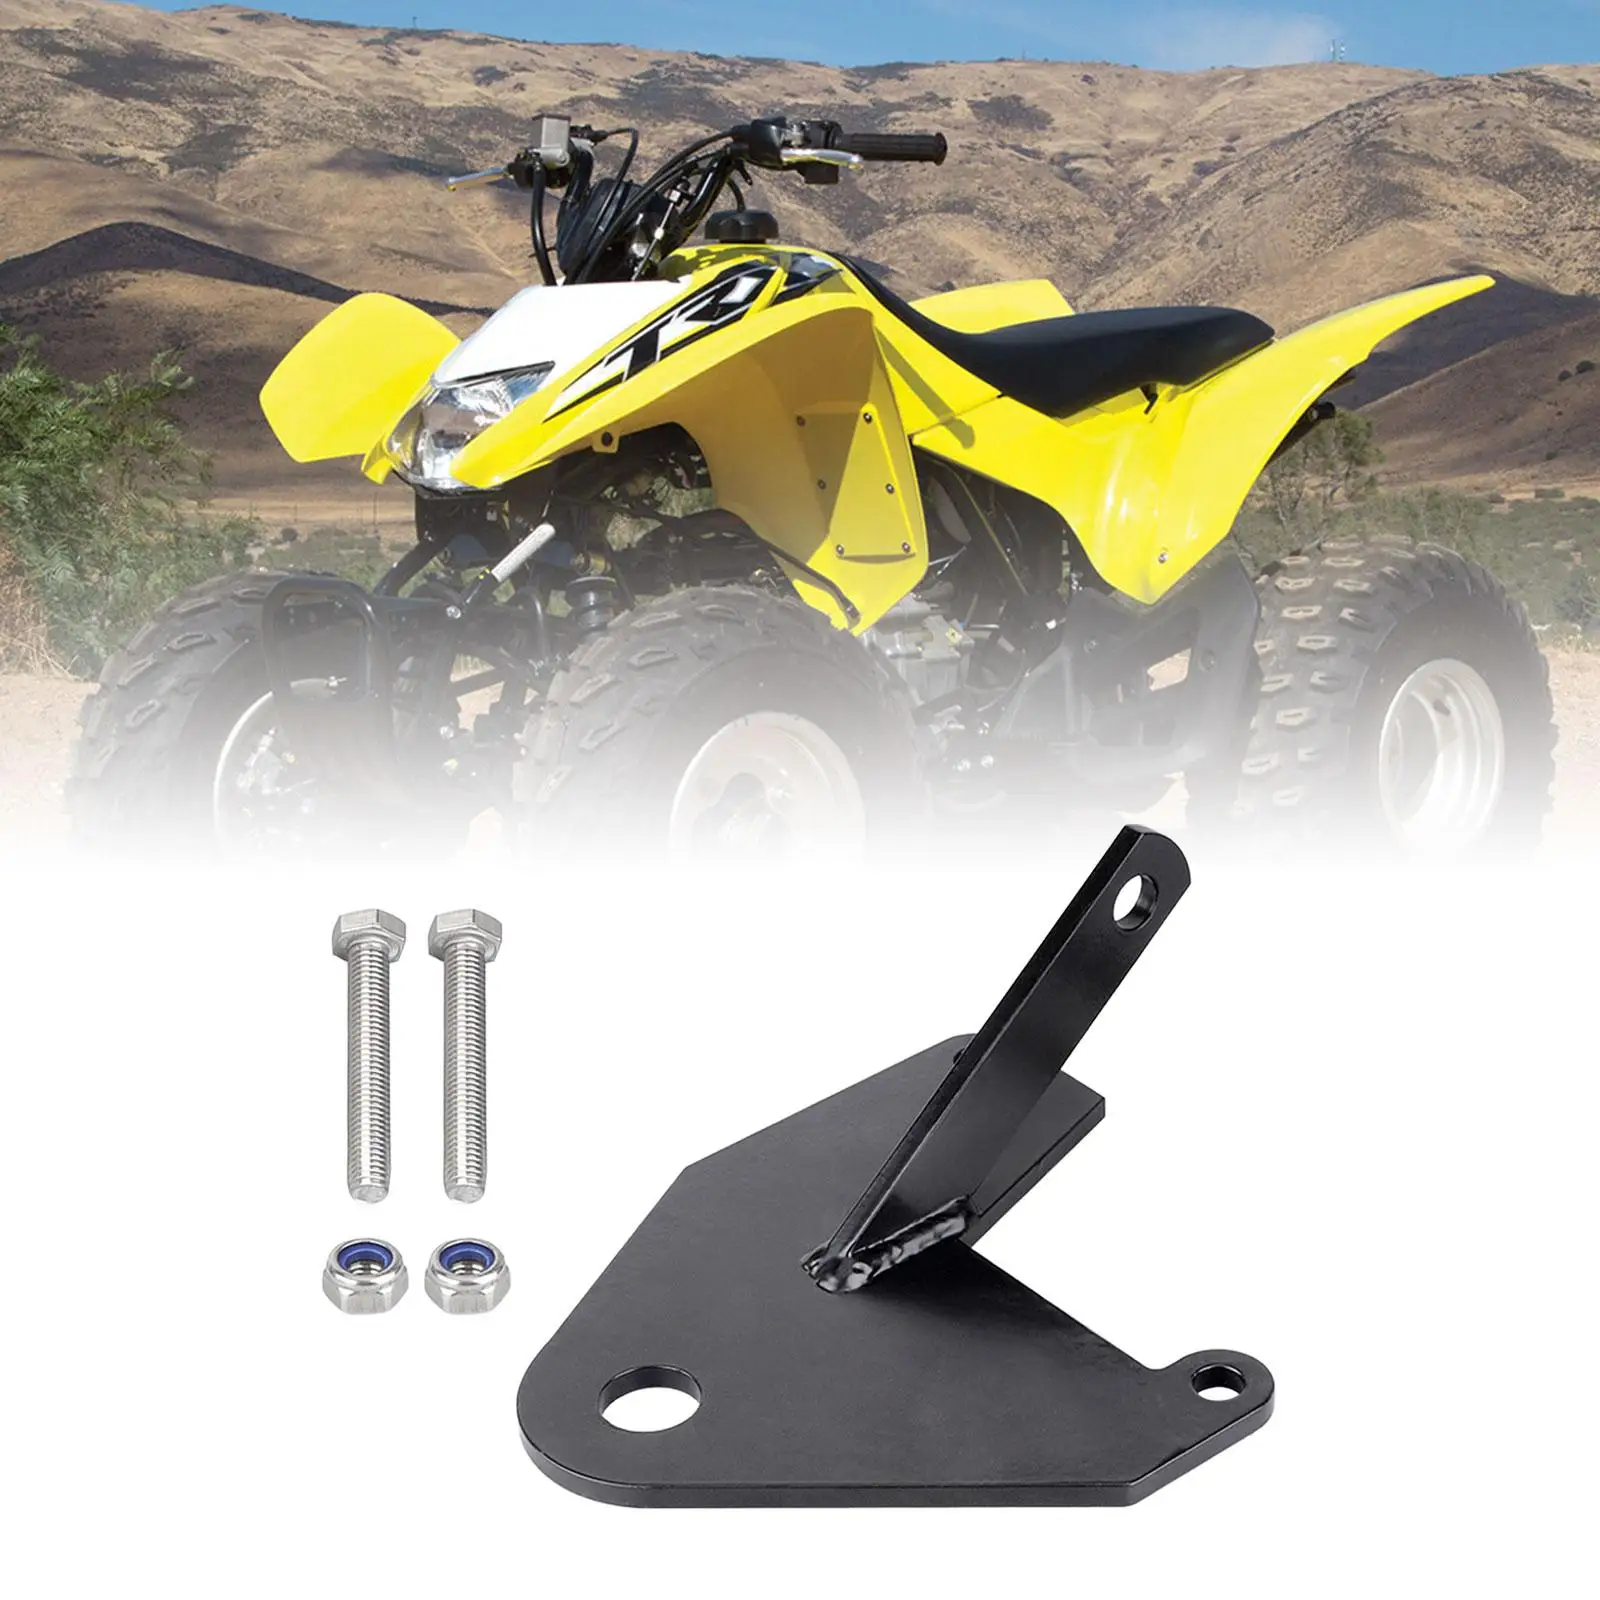 

Trailer Hitch Receiver Ball Mount ATV Ball Hitch with Hardware Sturdy Motorcycle Hook Bolt for TRX250 Recon ATV Assembly